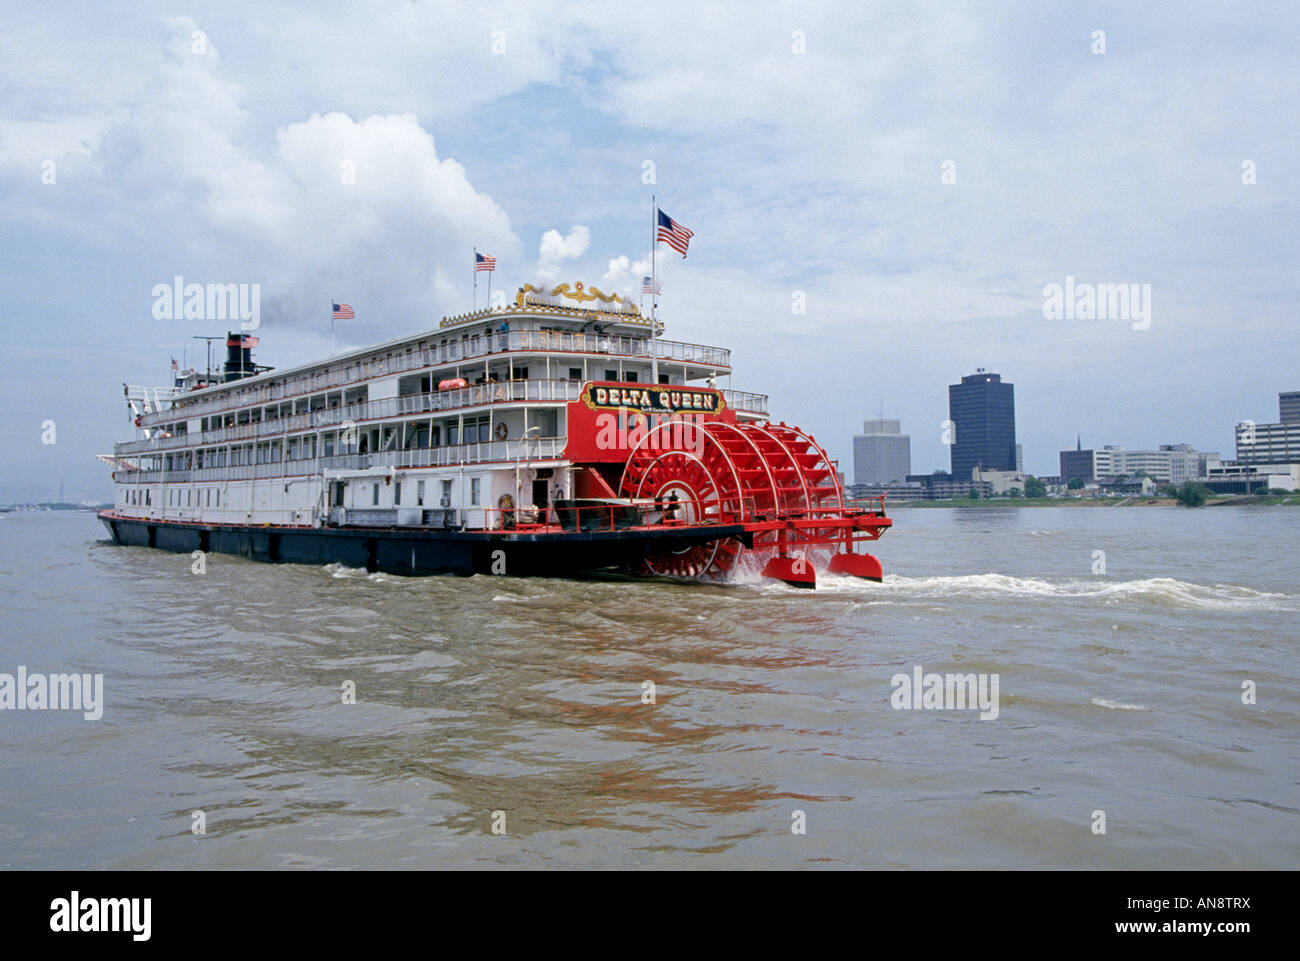 A view of the paddlewheel steamboat Delta Queen on the Mississippi River near Baton Rouge Stock Photo